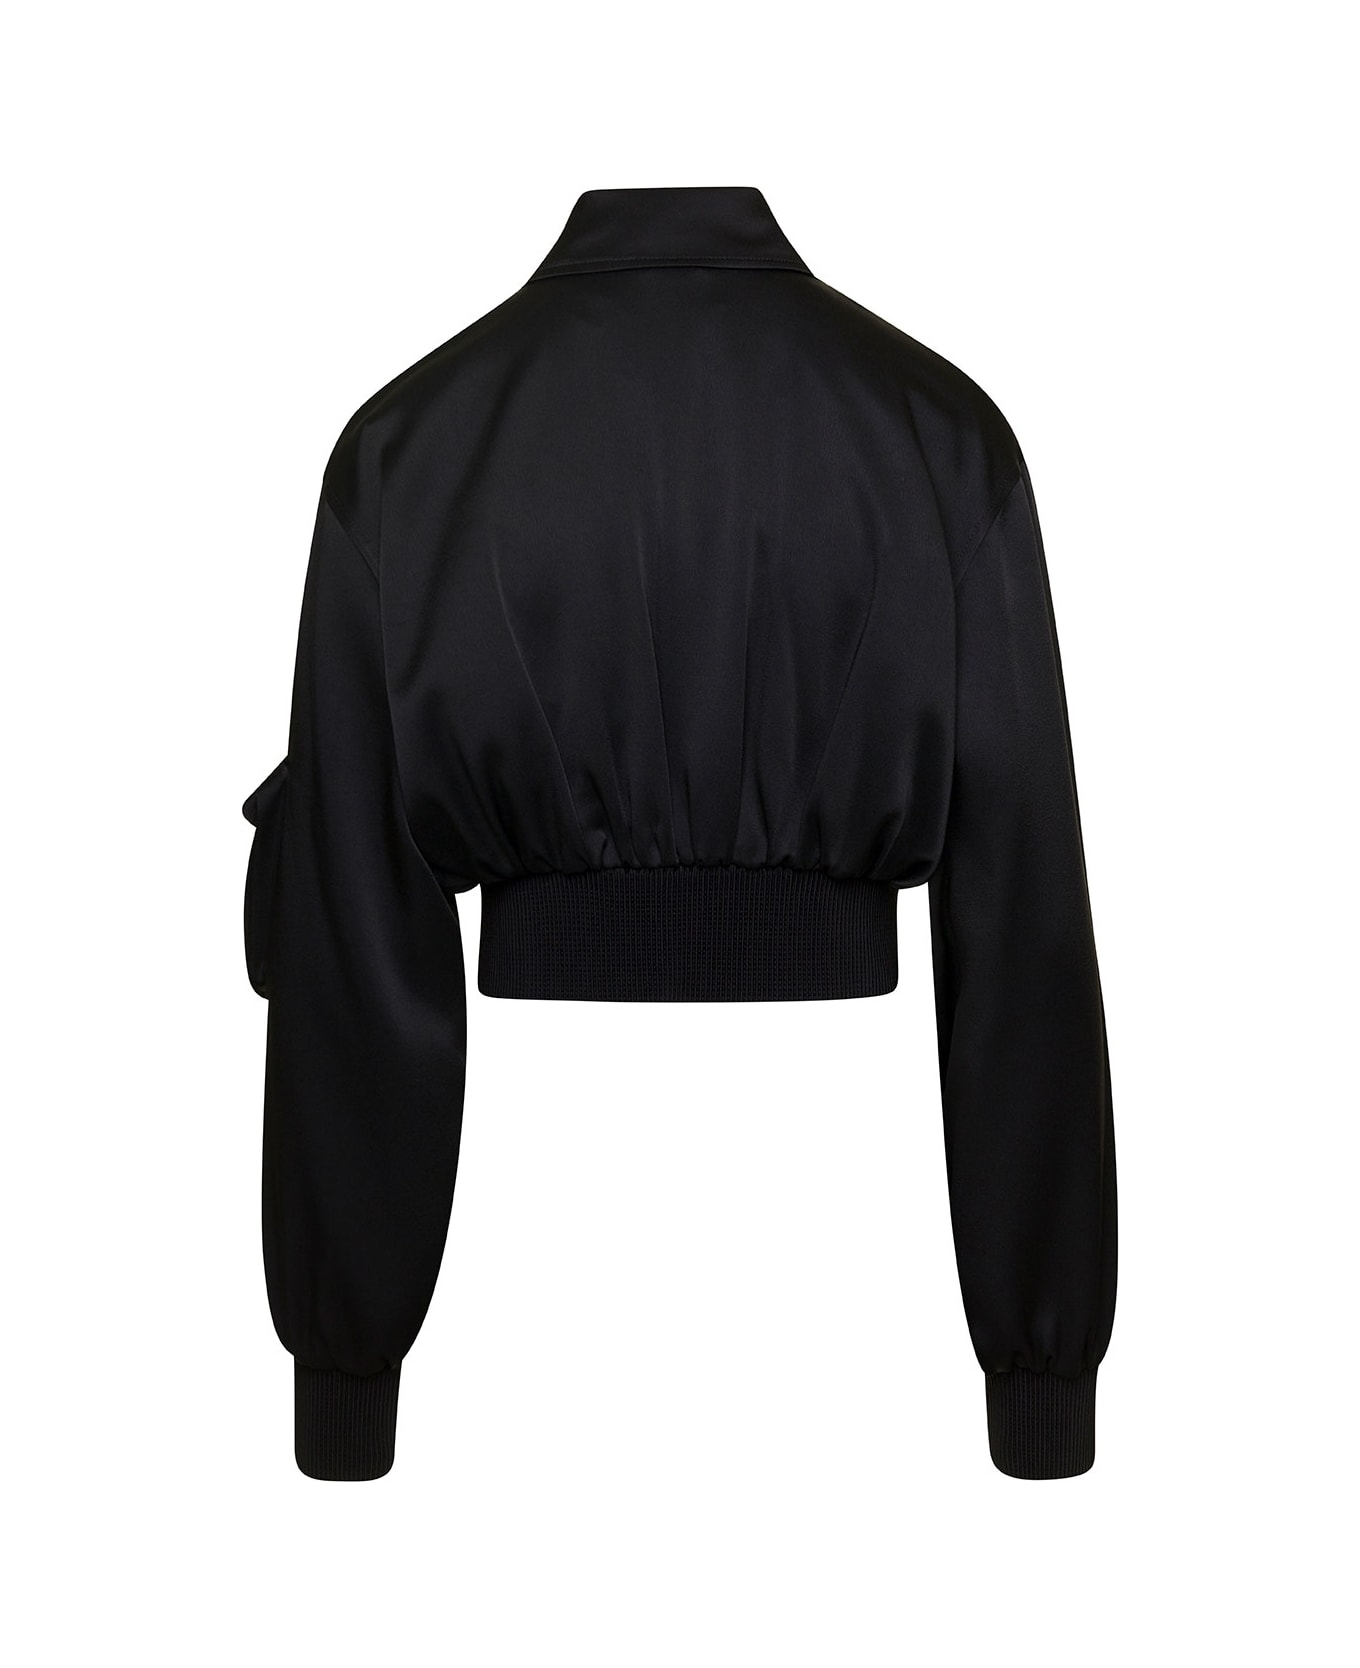 Blumarine Black Cropped Jacket With Macro Patch Pockets In Satin Woman - Black